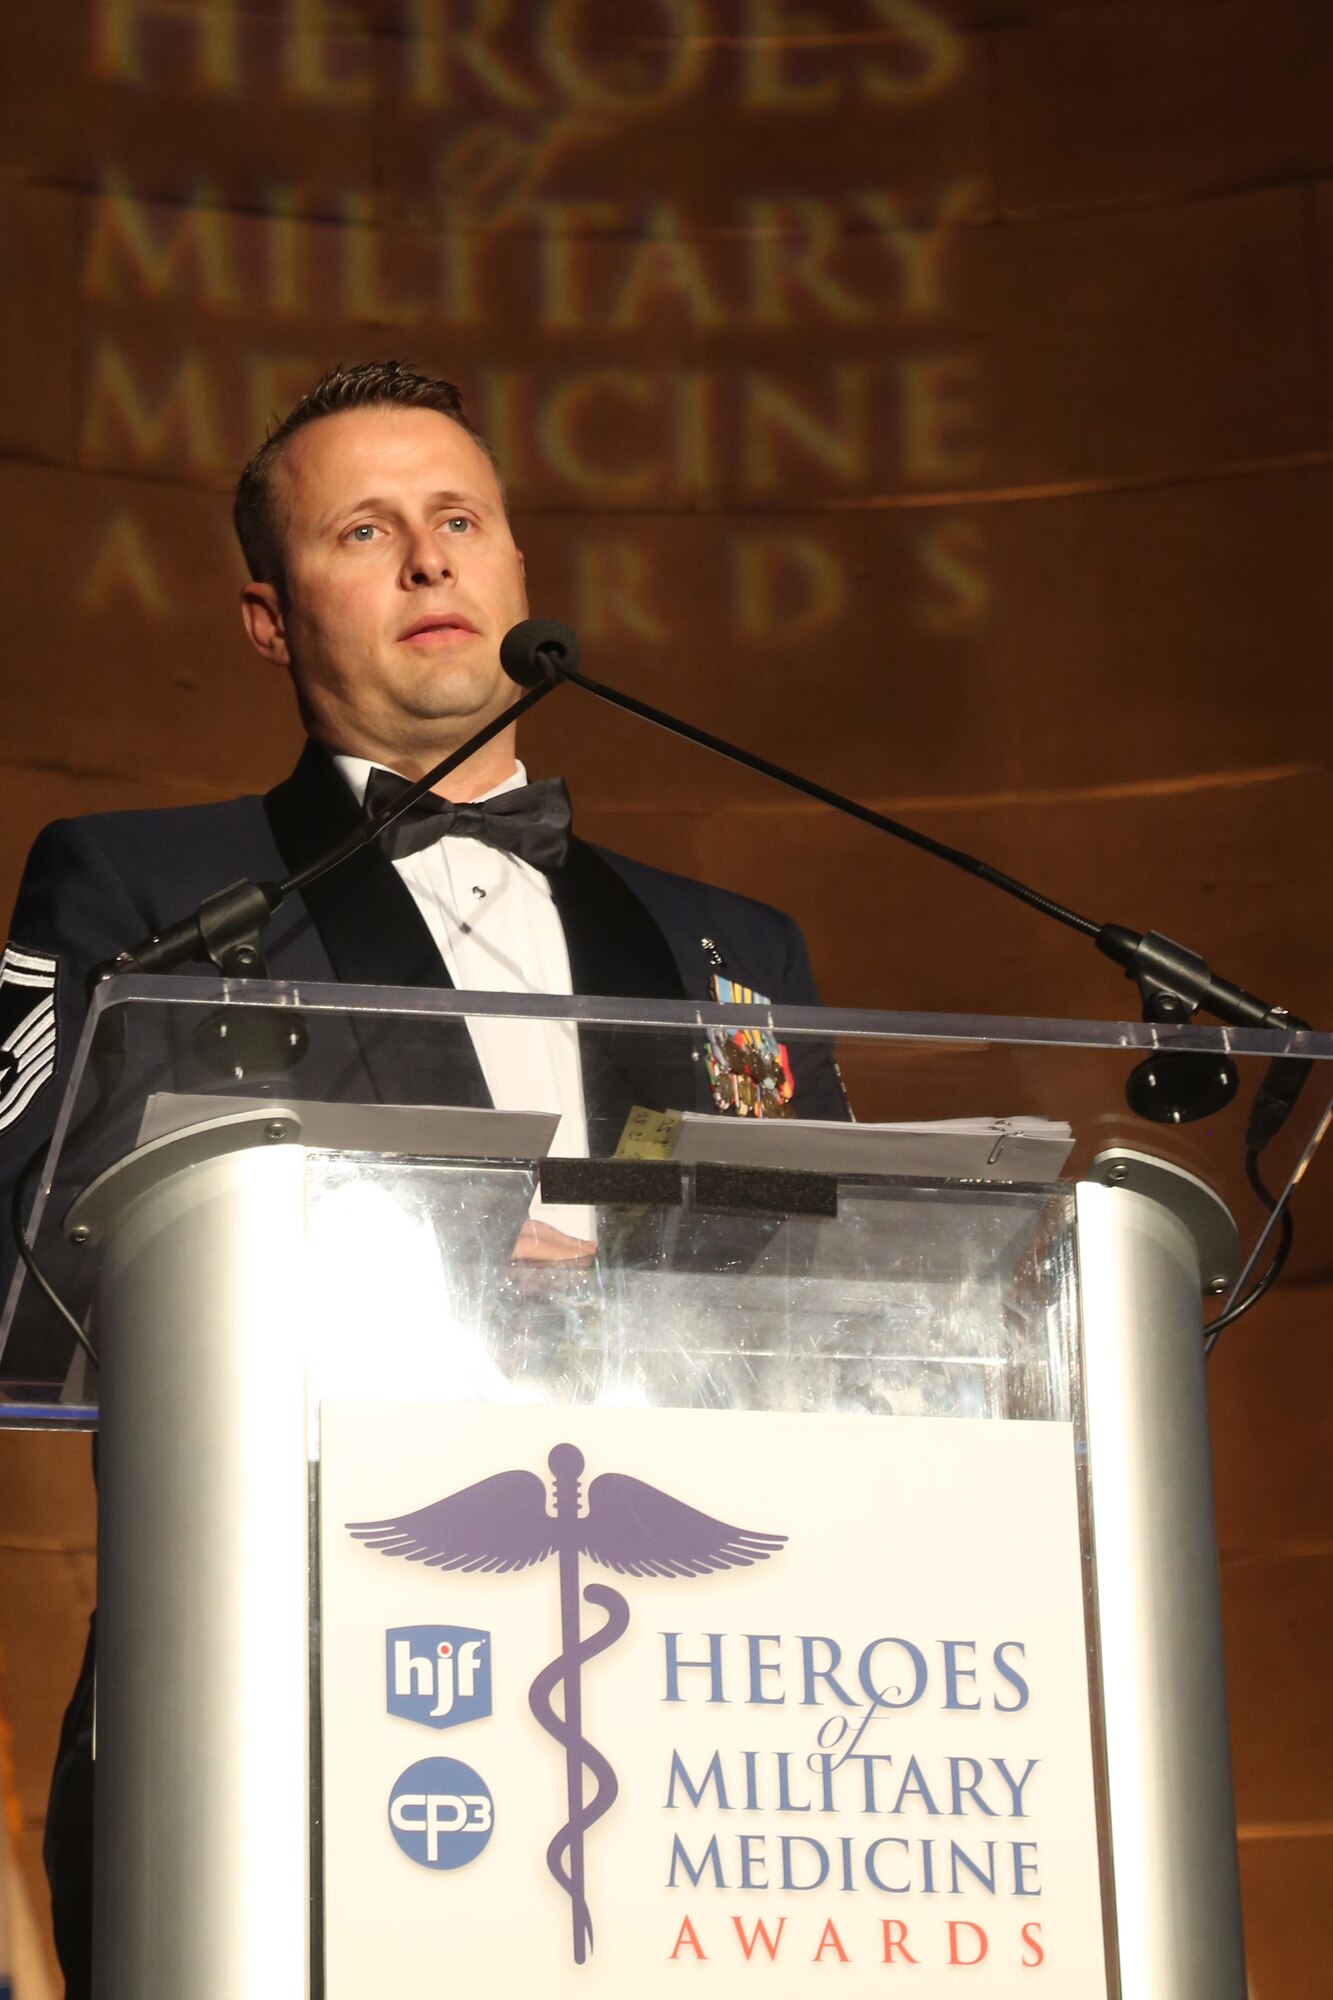 Senior Master Sgt. David Smith, 22nd Force Support Squadron career advisor, gives an acceptance speech after receiving the 2014 Heroes of Military Medicine award, May 1, 2014, Washington, D.C. Smith was recognized for helping revise the Advanced Medic Course lectures, lab procedures, and patient simulation scenarios which prepared more than 300 special operations medics. (courtesy photo) 

